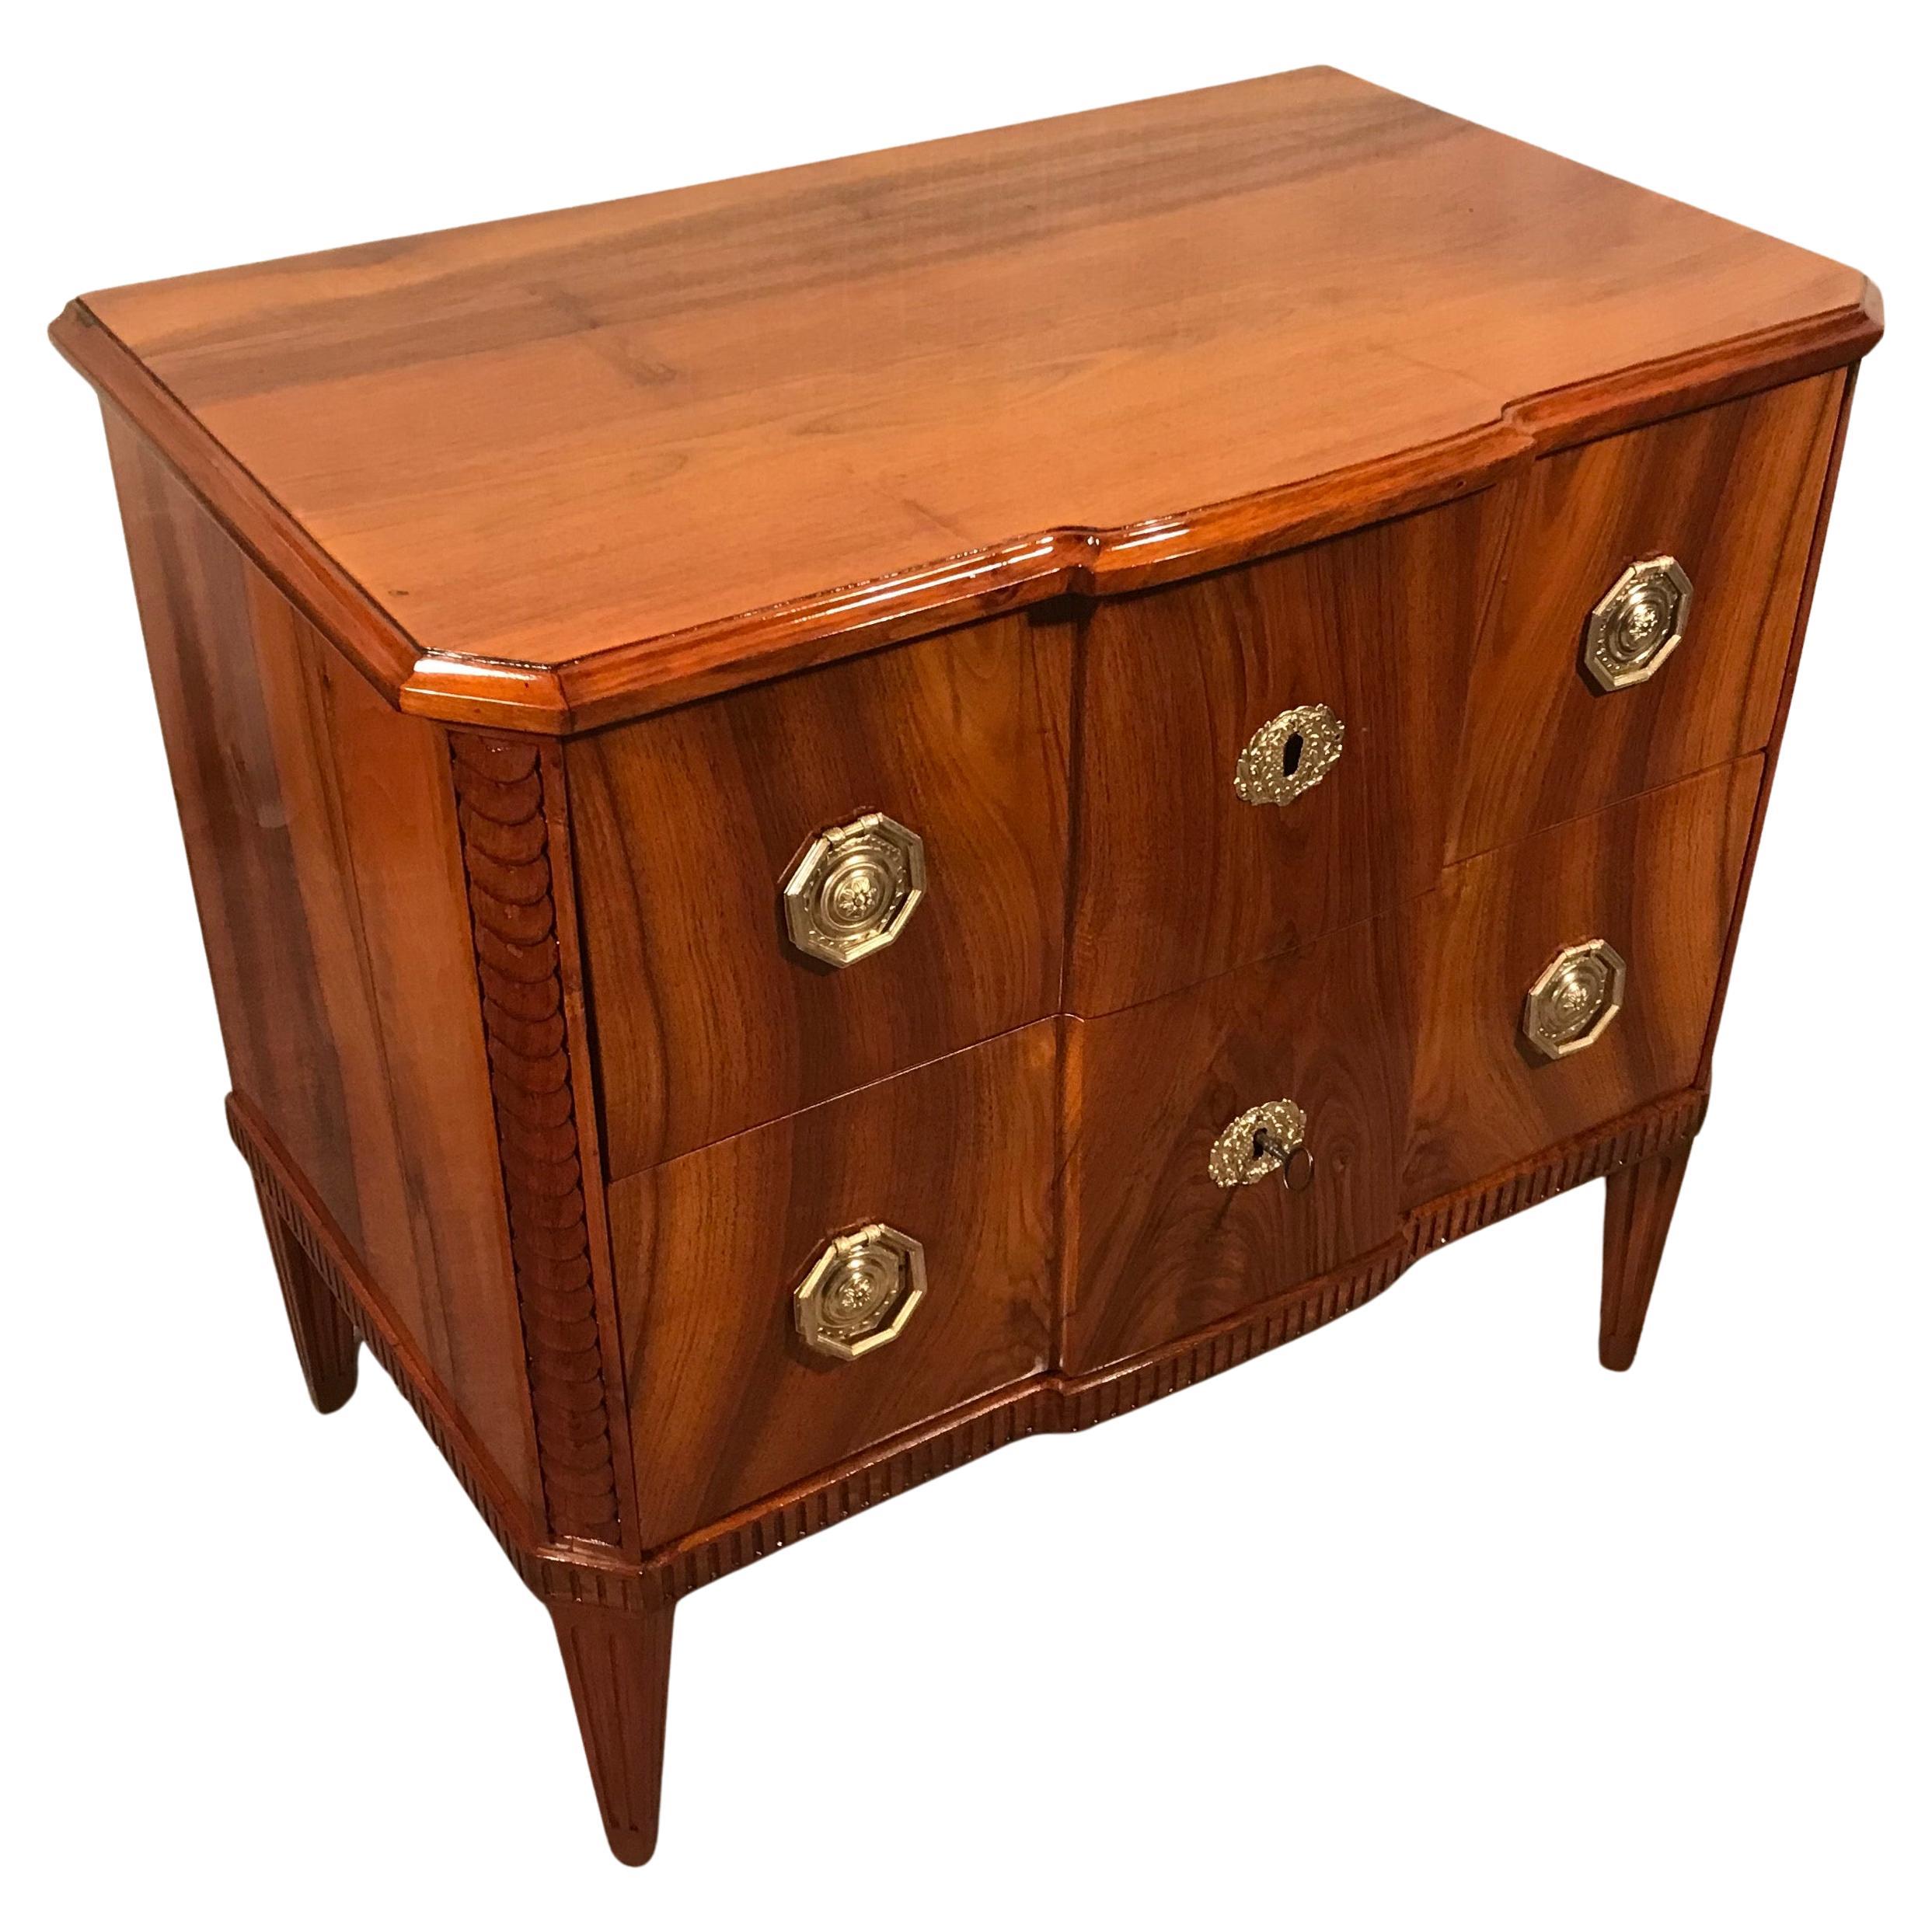 Uncover the historical charm of our Antique Louis XVI Chest of Drawers, a masterpiece dating back to 1780 and hailing from Southern Germany. Crafted with precision from solid walnut, this one-of-a-kind dresser stands on gracefully tapering legs,